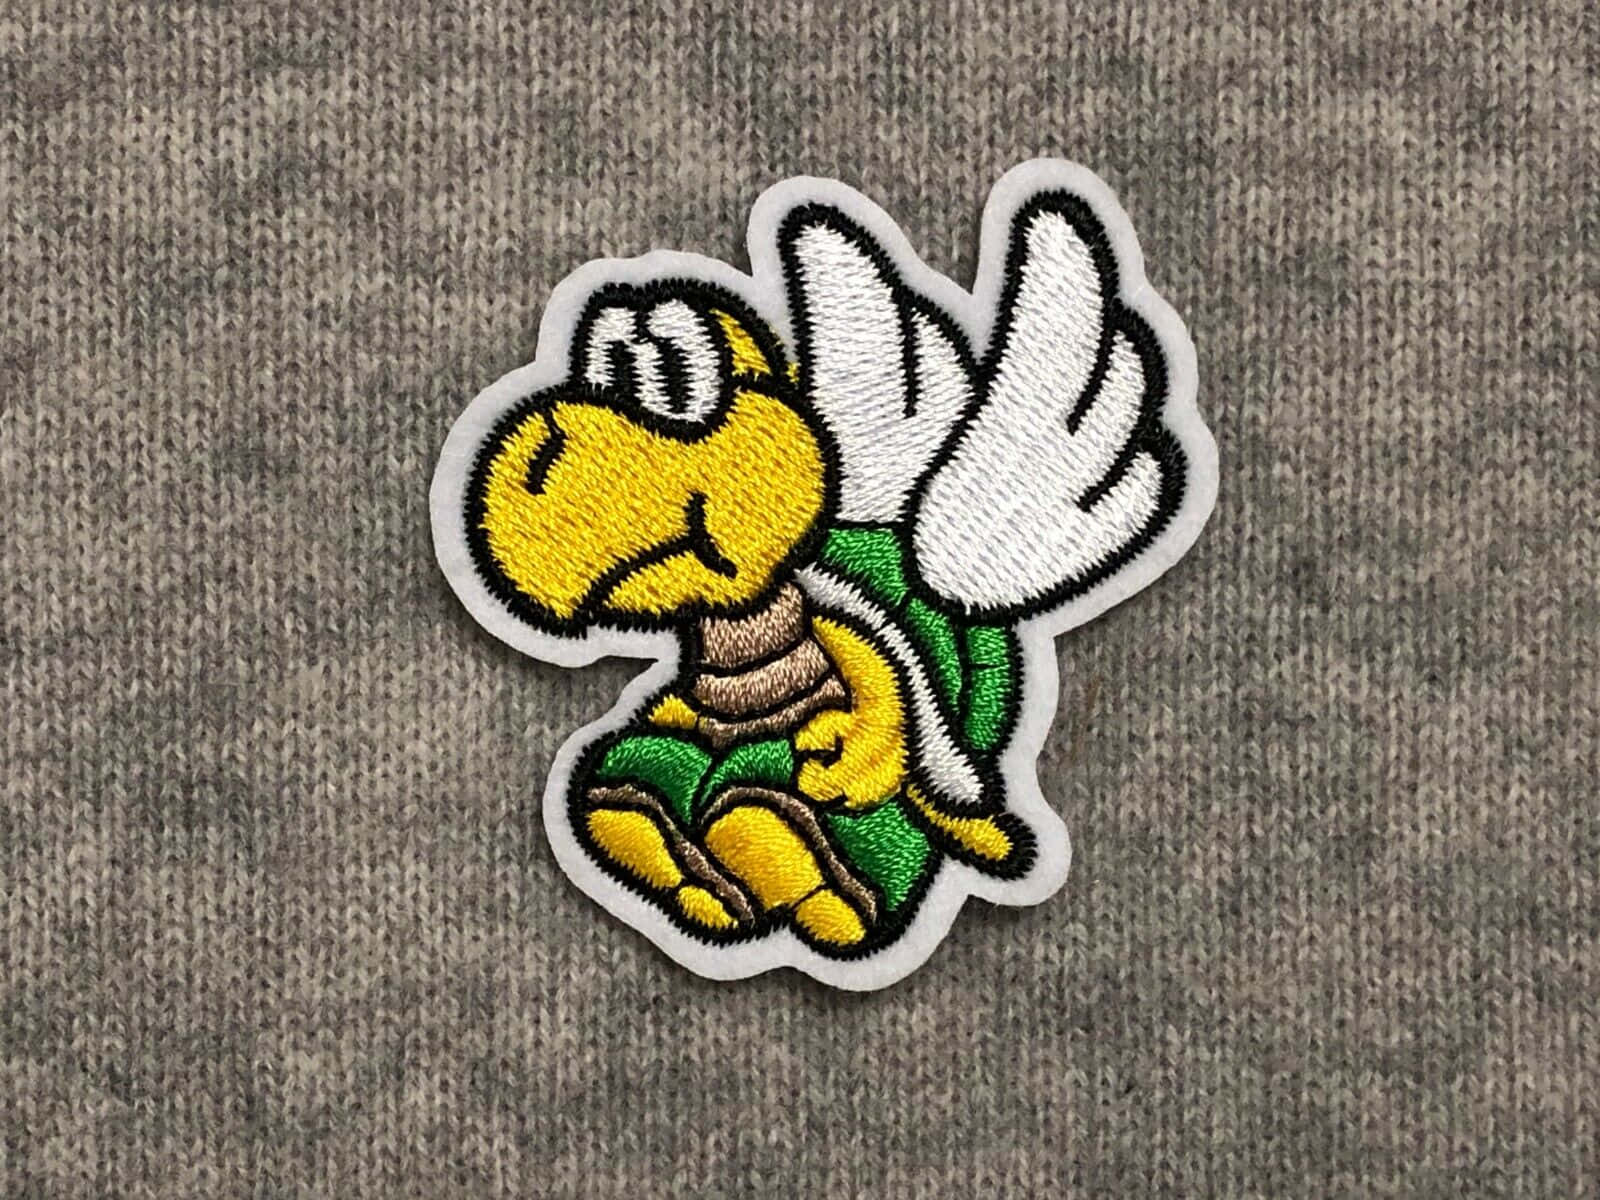 Koopa Troopa marching on a colorful platform Wallpaper